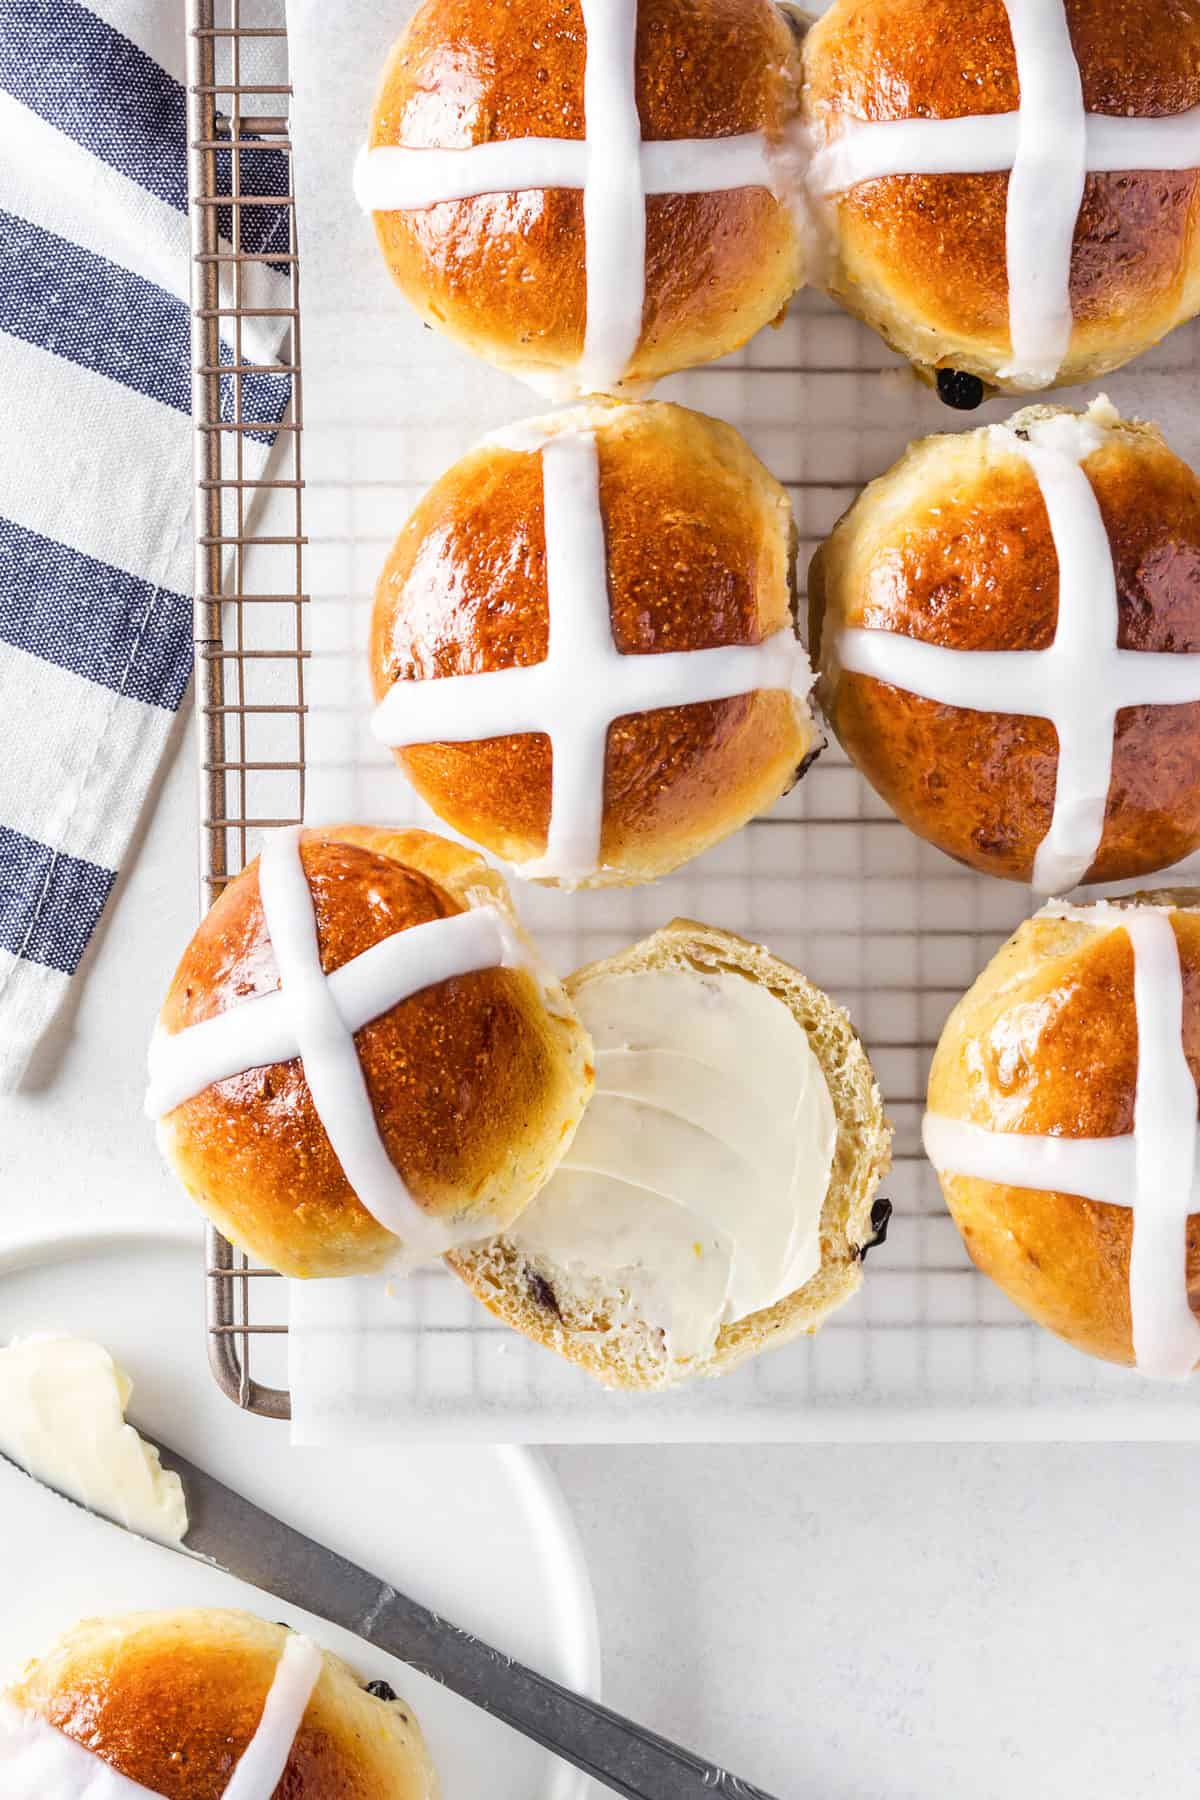 hot cross buns on a wire rack with one bun cut length wise smothered with frosting